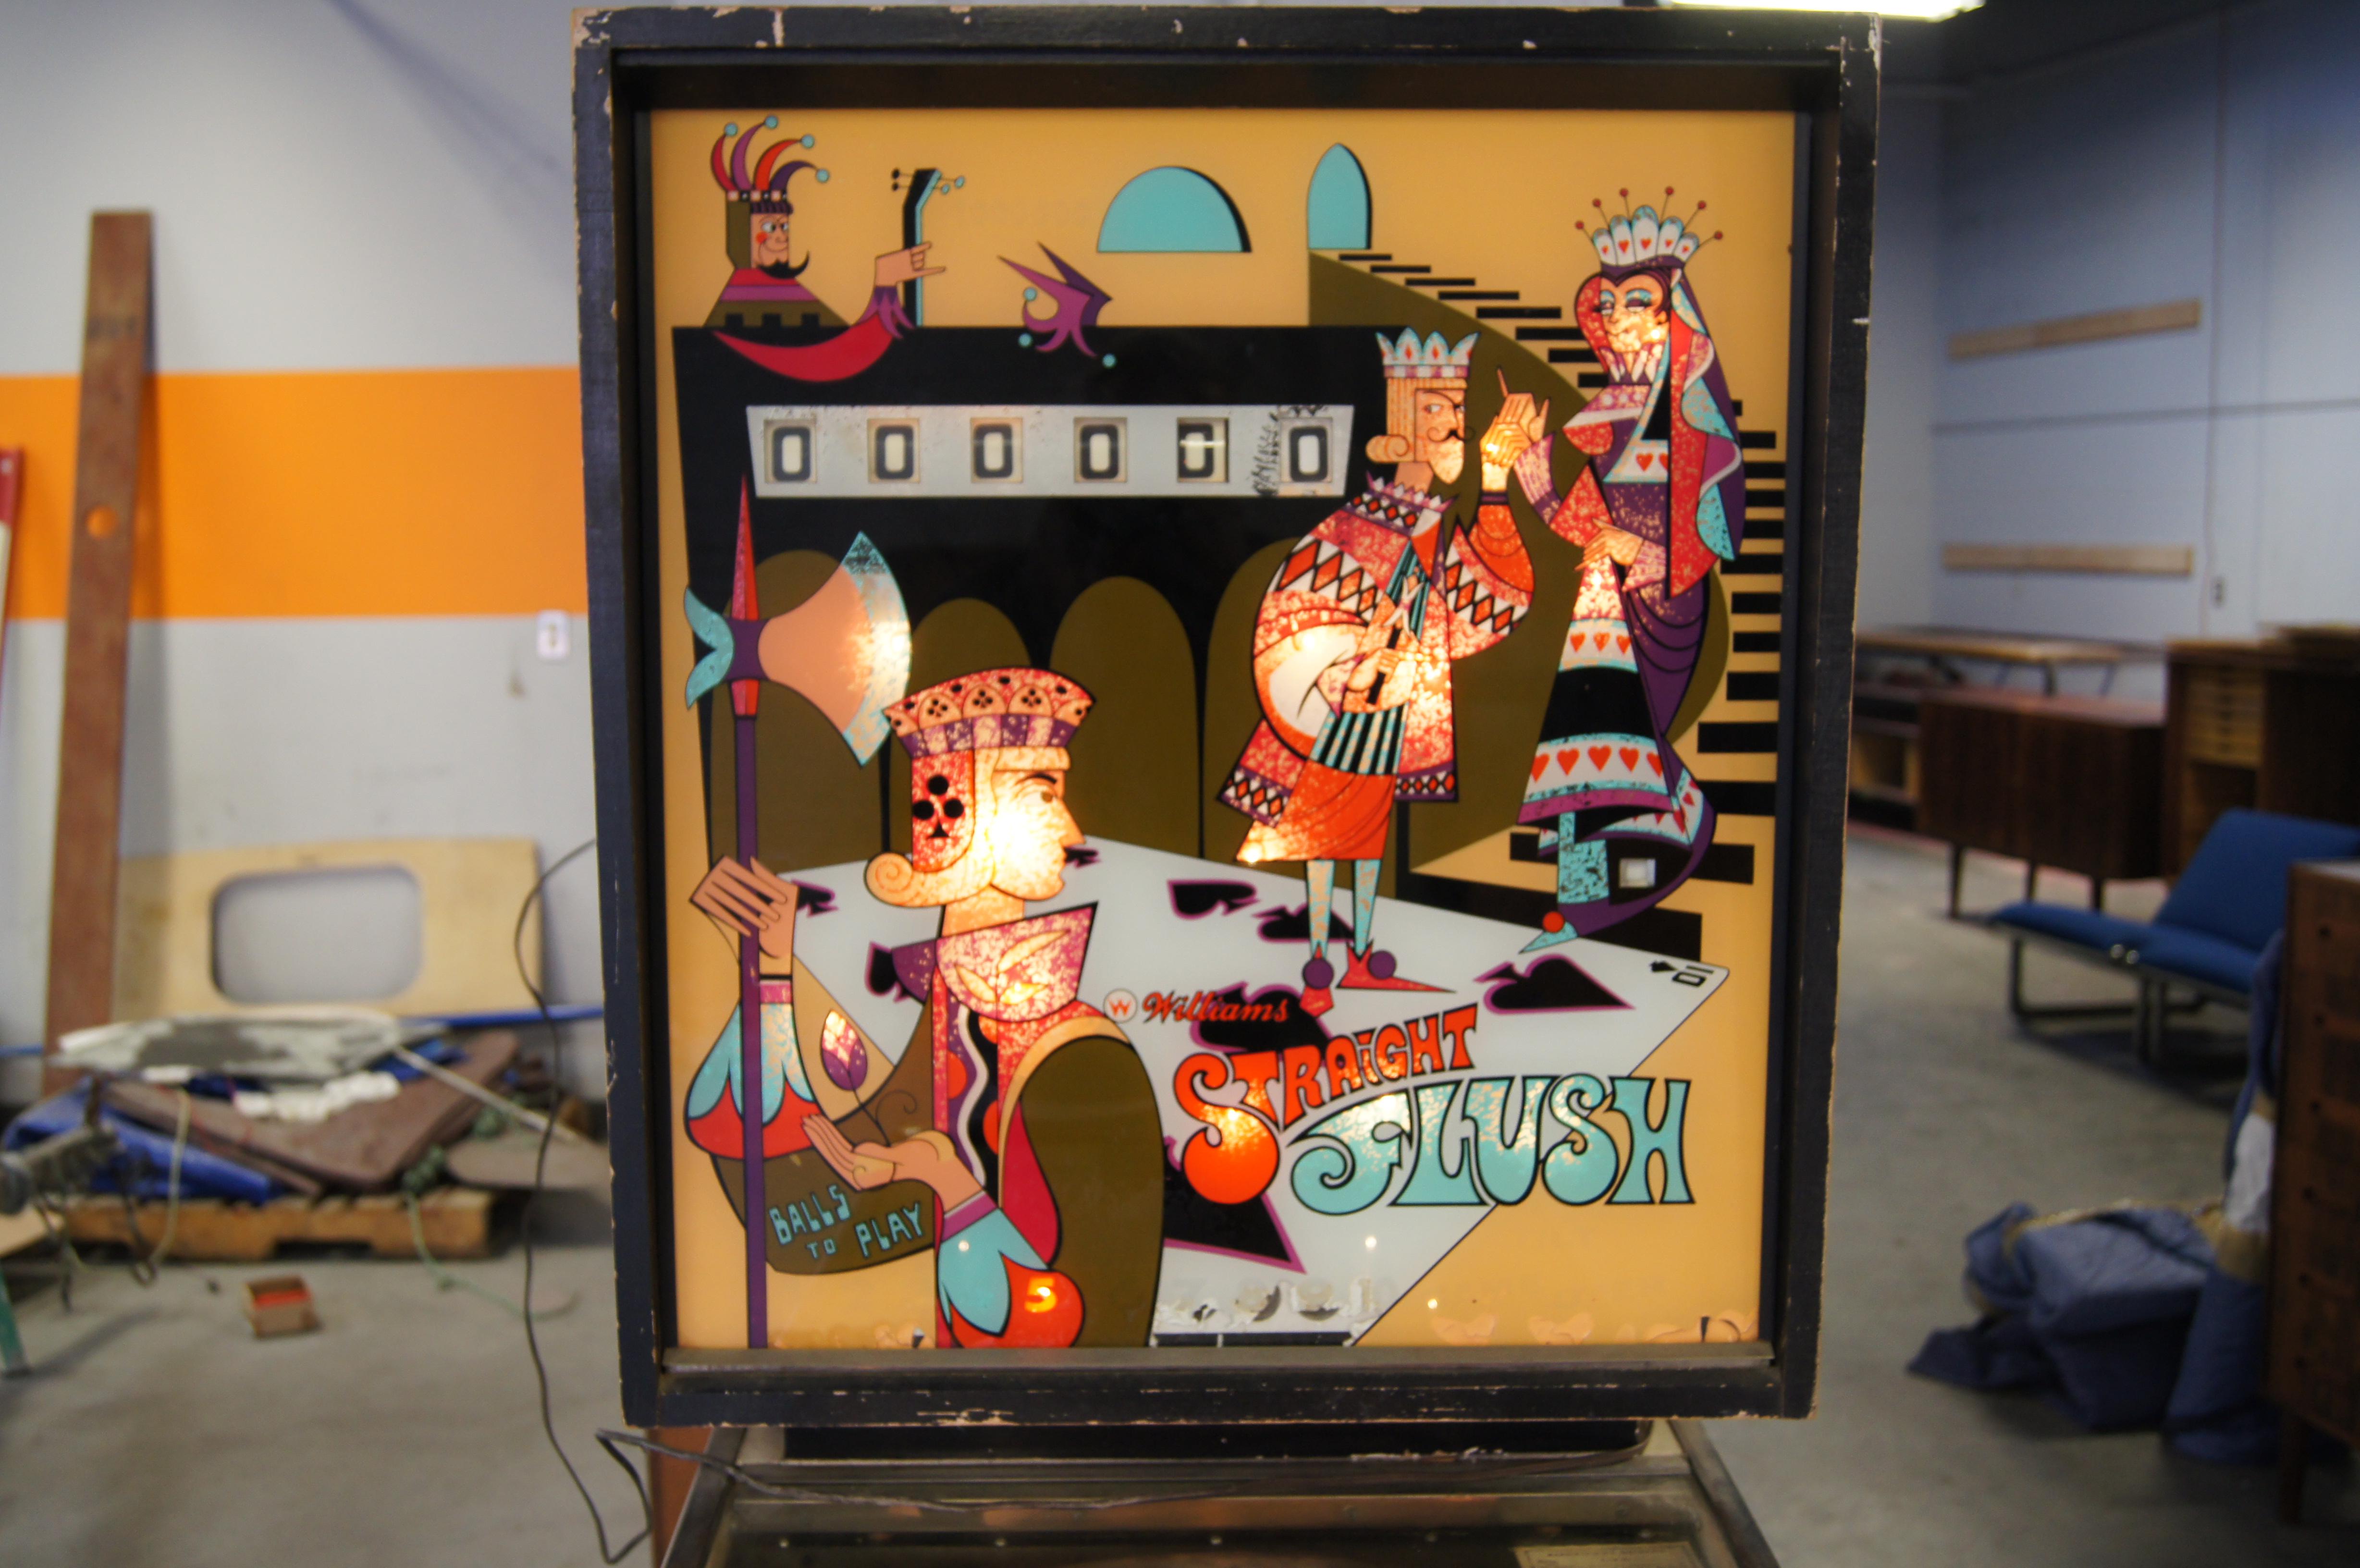 Manufactured in 1970 by Chicago-based Williams Electronics as model 389, with a design by Norm Clark and artwork by Christian Marche, Straight Flush is a poker-themed single-player pinball machine. It features two flippers, two slingshots, five pop